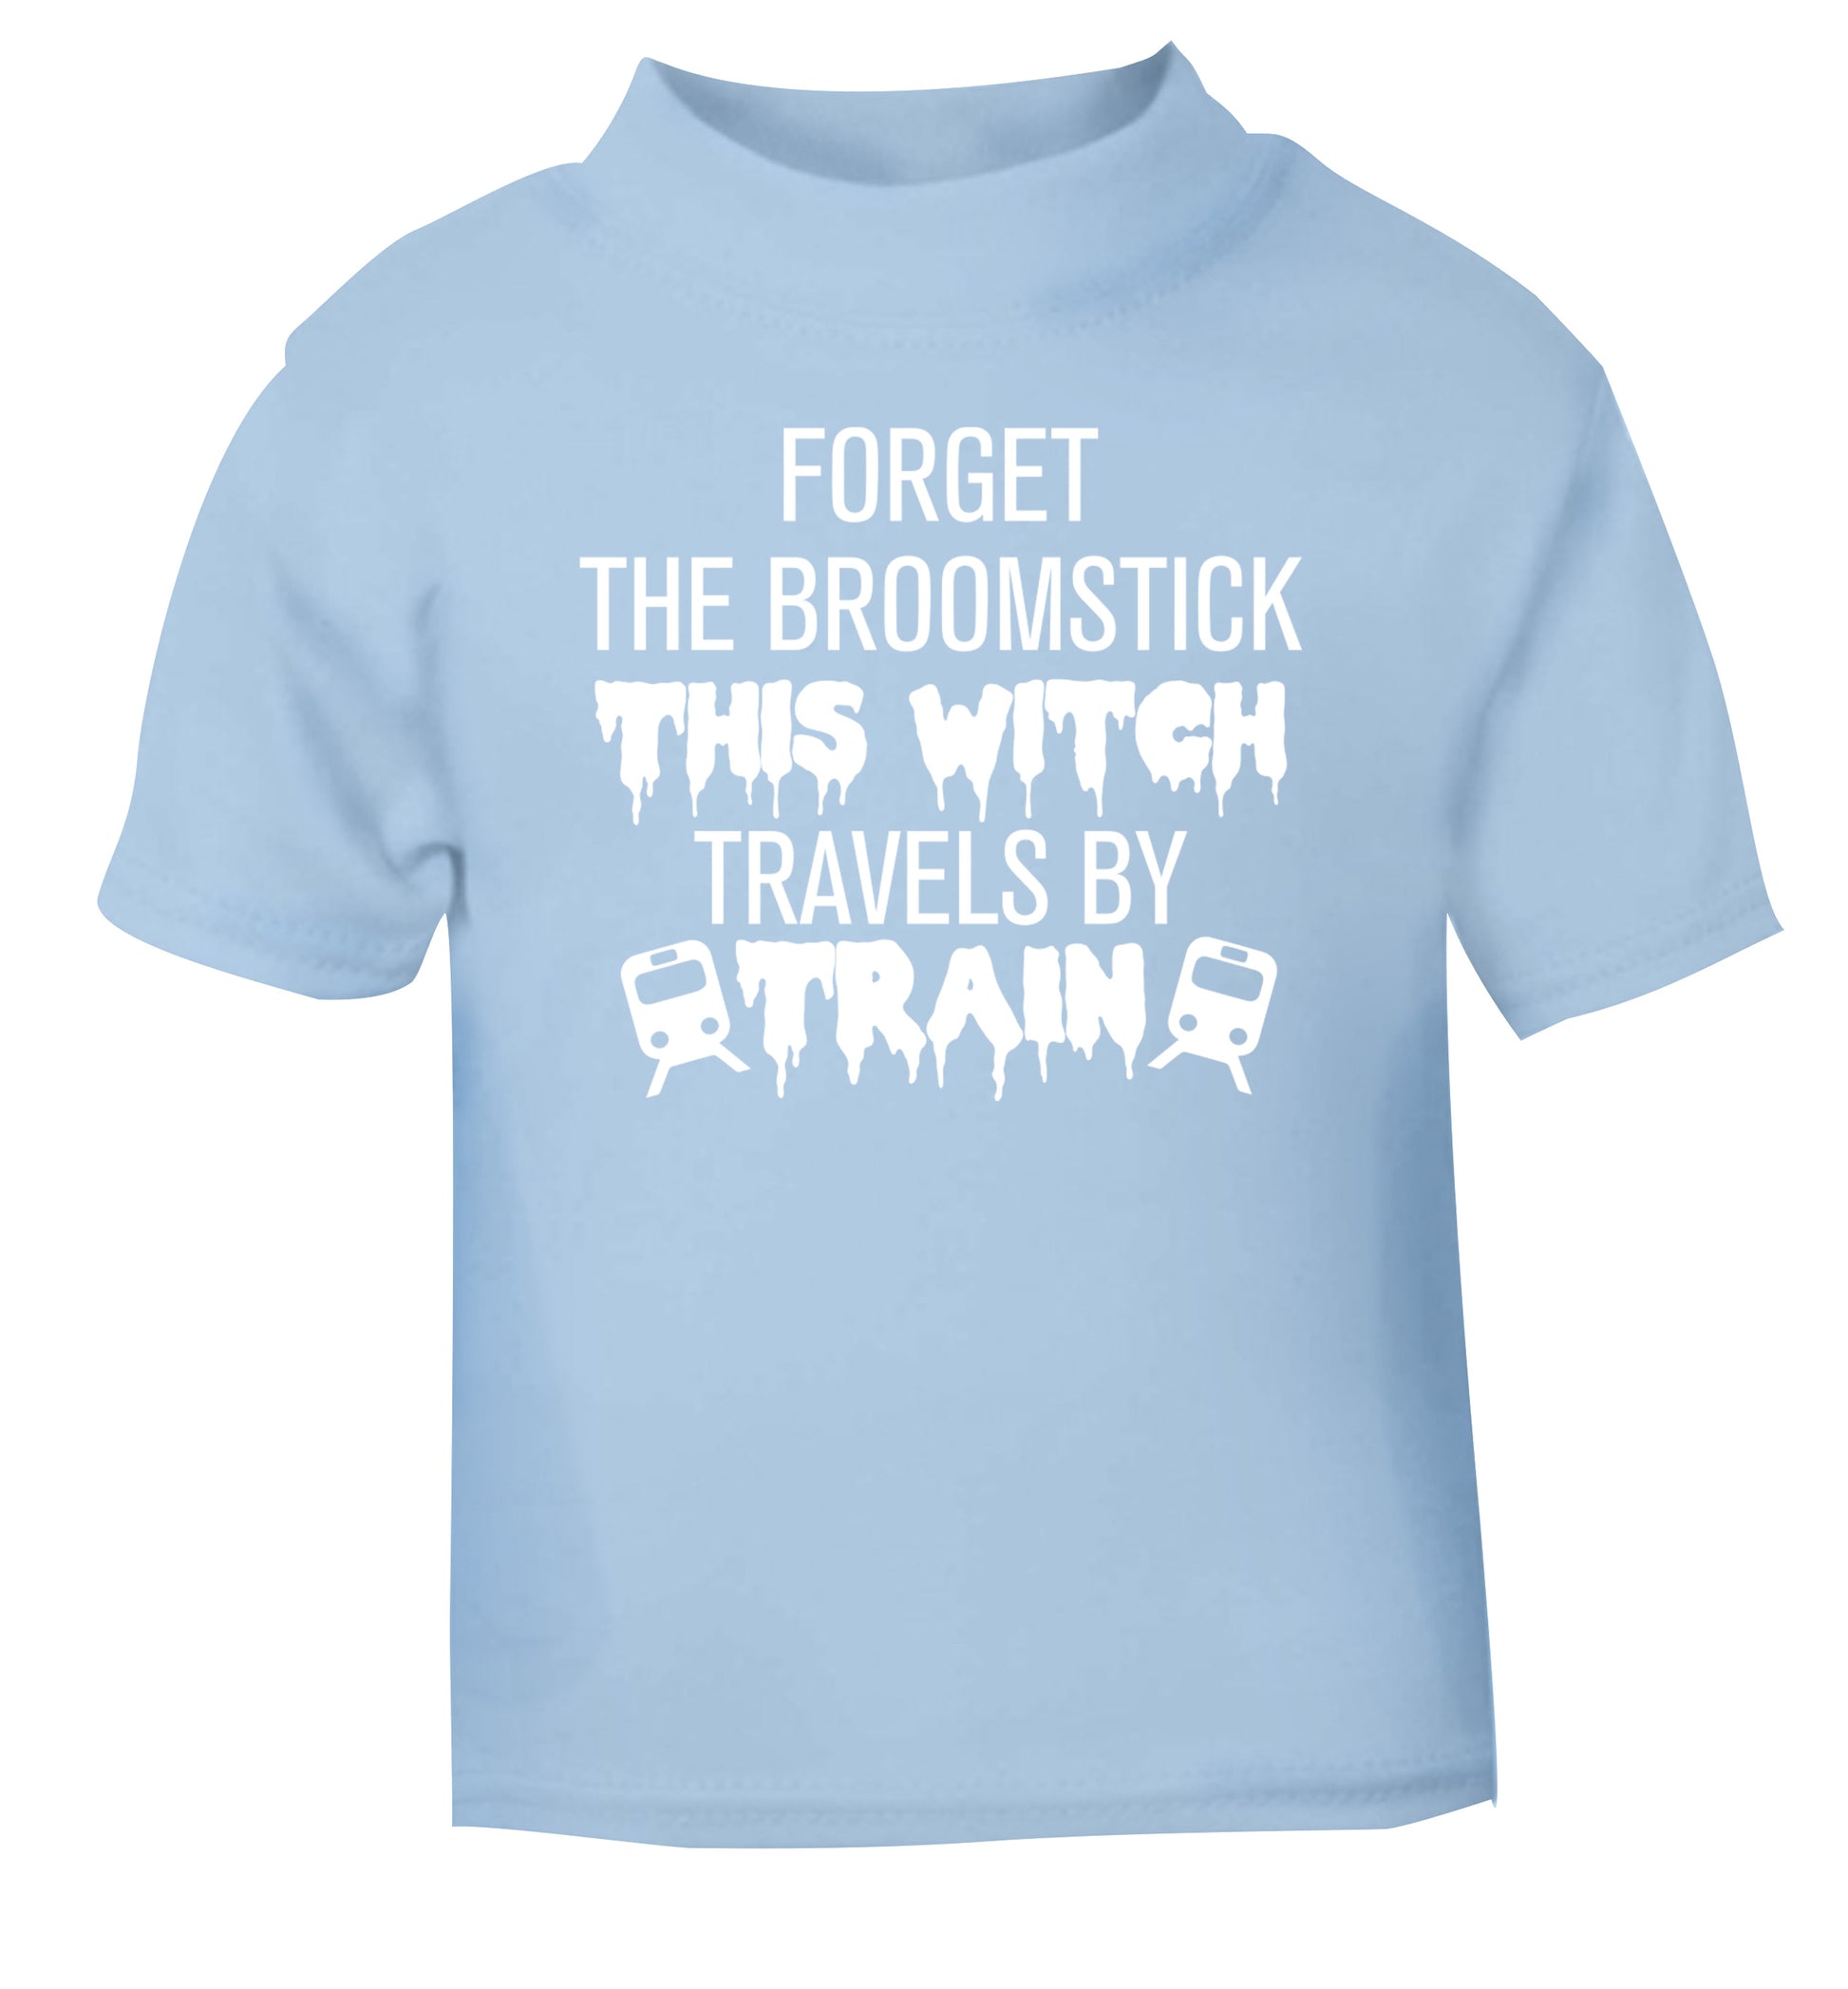 Forget the broomstick this witch travels by train light blue Baby Toddler Tshirt 2 Years